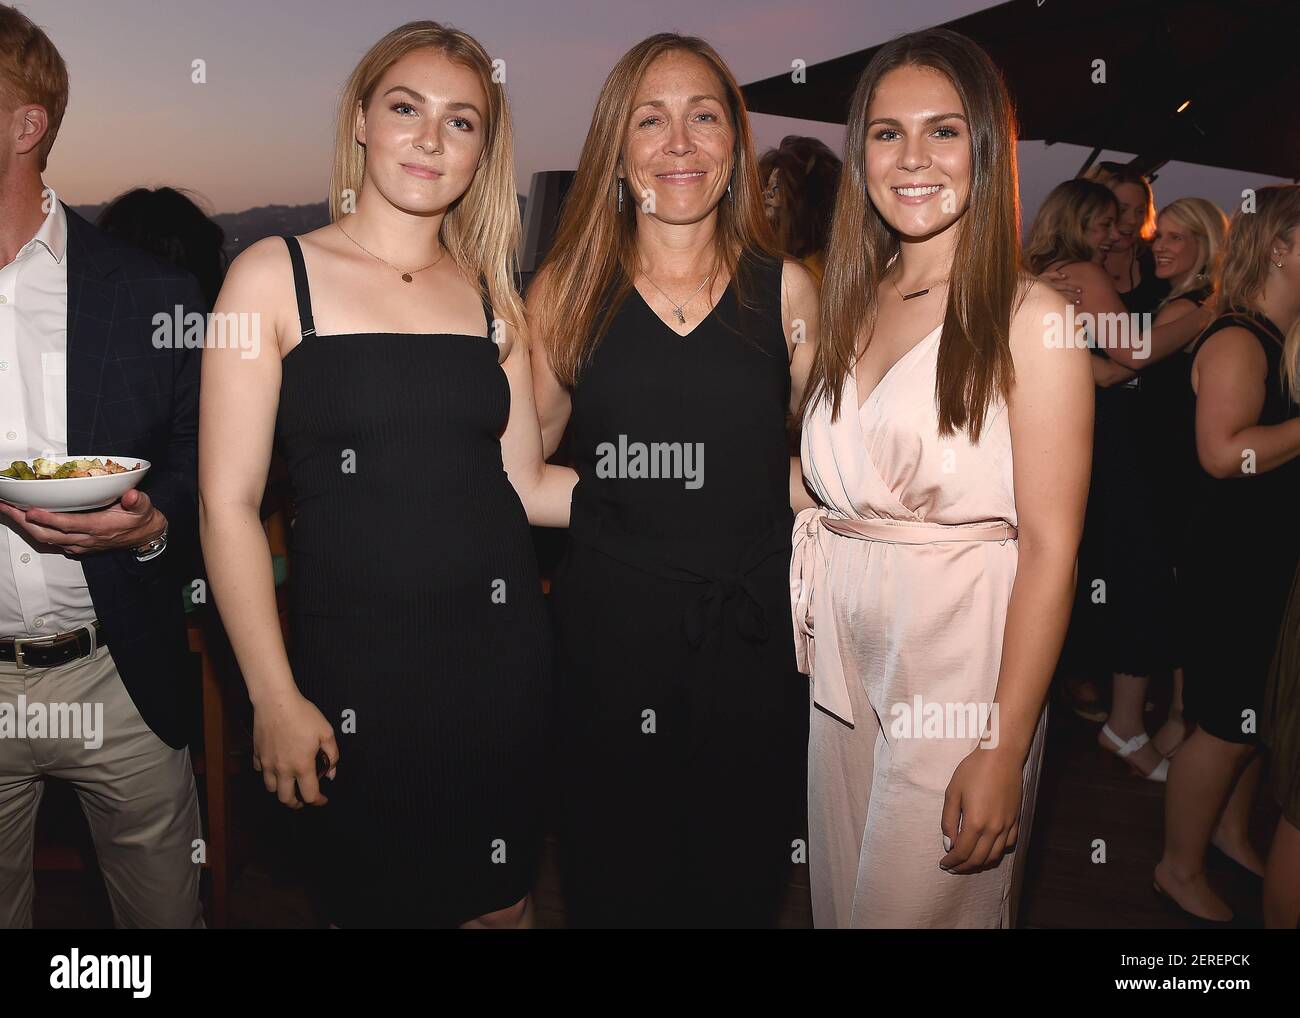 BEVERLY HILLS - JULY 24: Dr. Michelle Oakley (center) and daughters at  National Geographic's 'Summer TCA Kickoff Party' at The Rooftop by JG at  the Waldorf Astoria on July 24, 2018 in